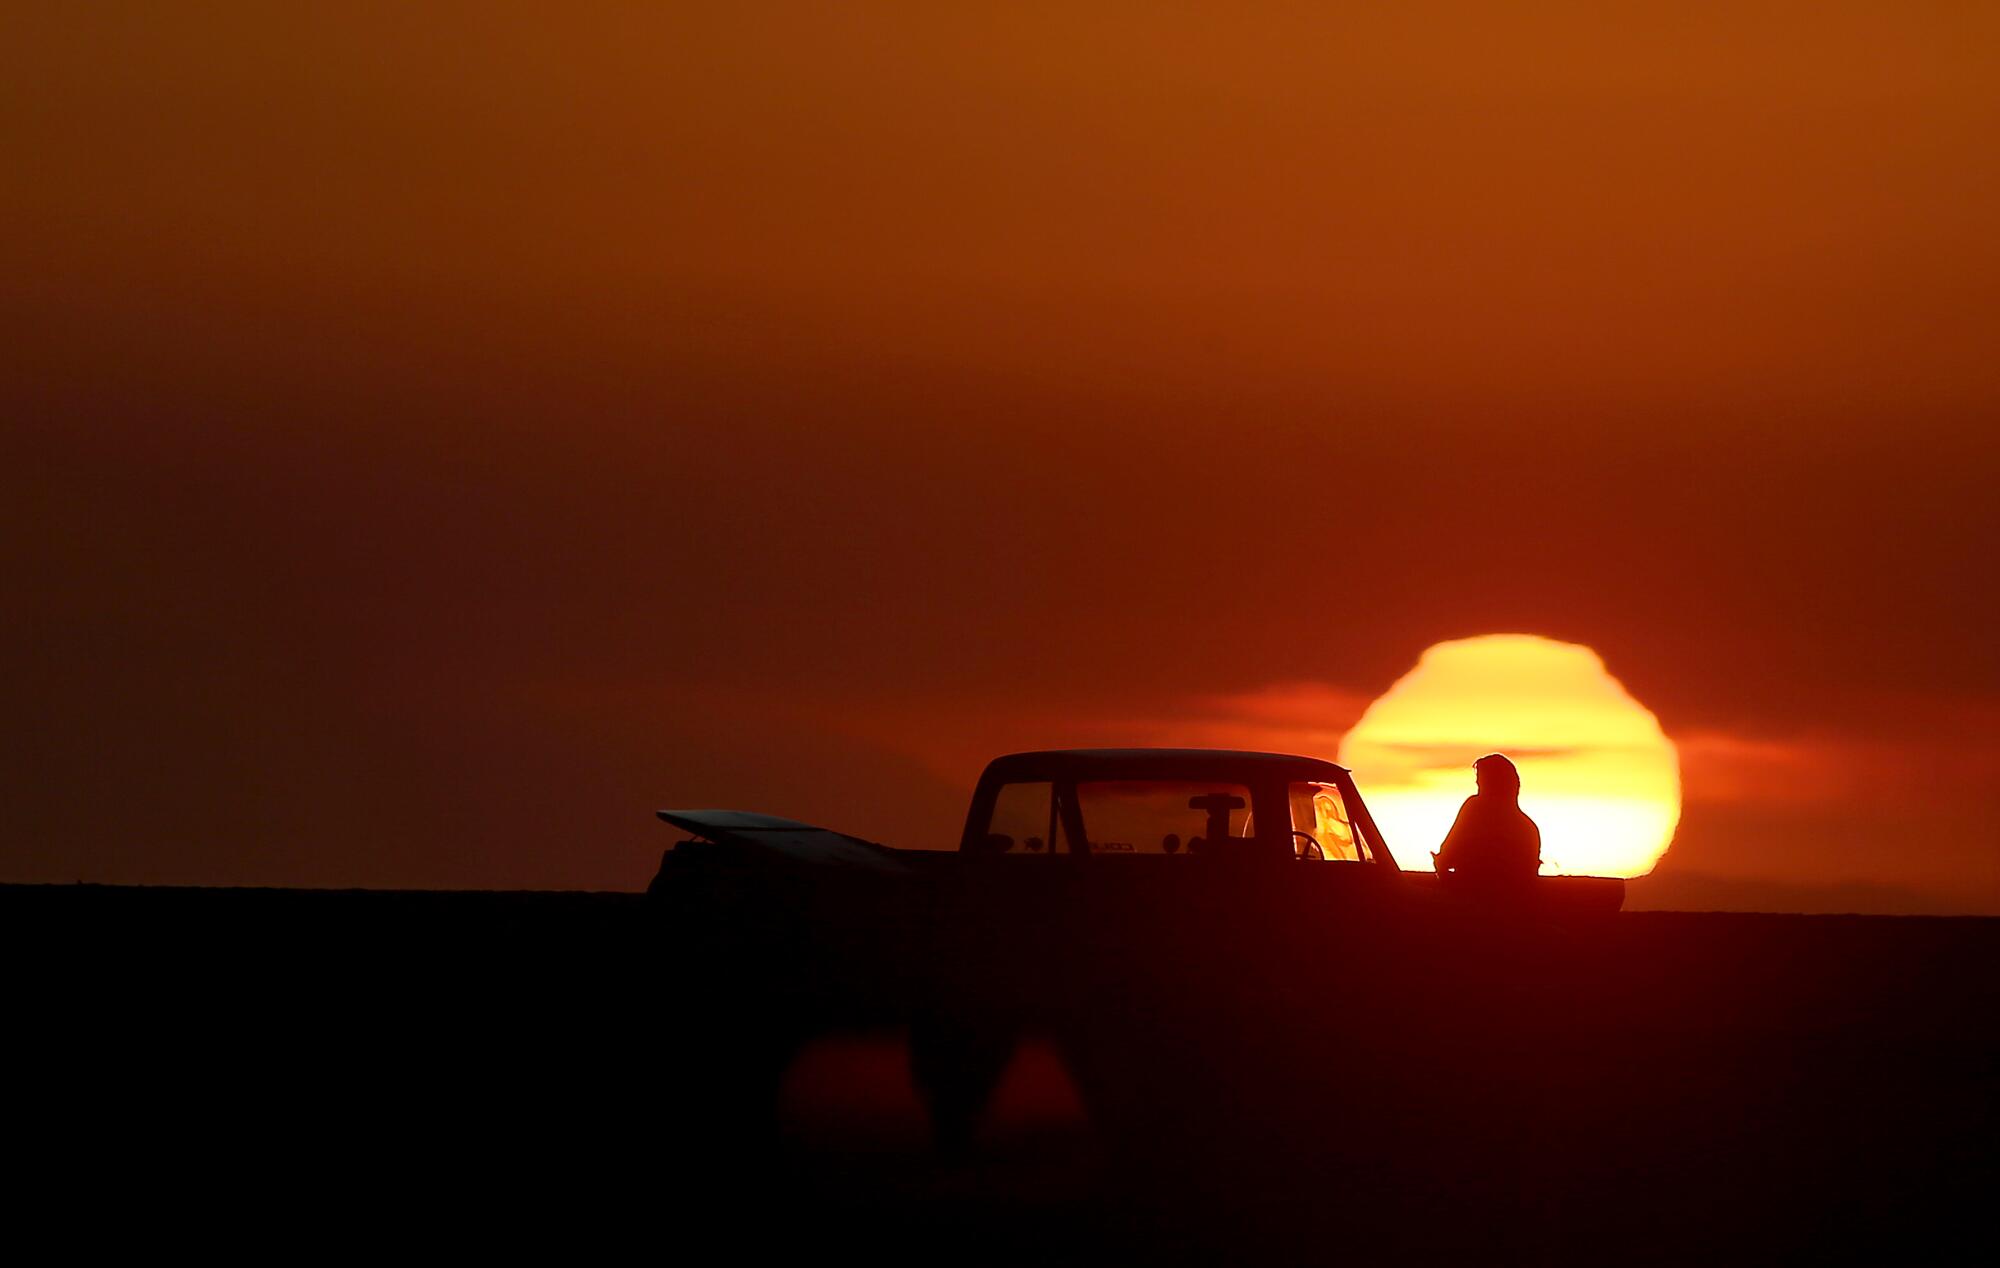 A man and his pickup truck are silhouetted by the setting sun.